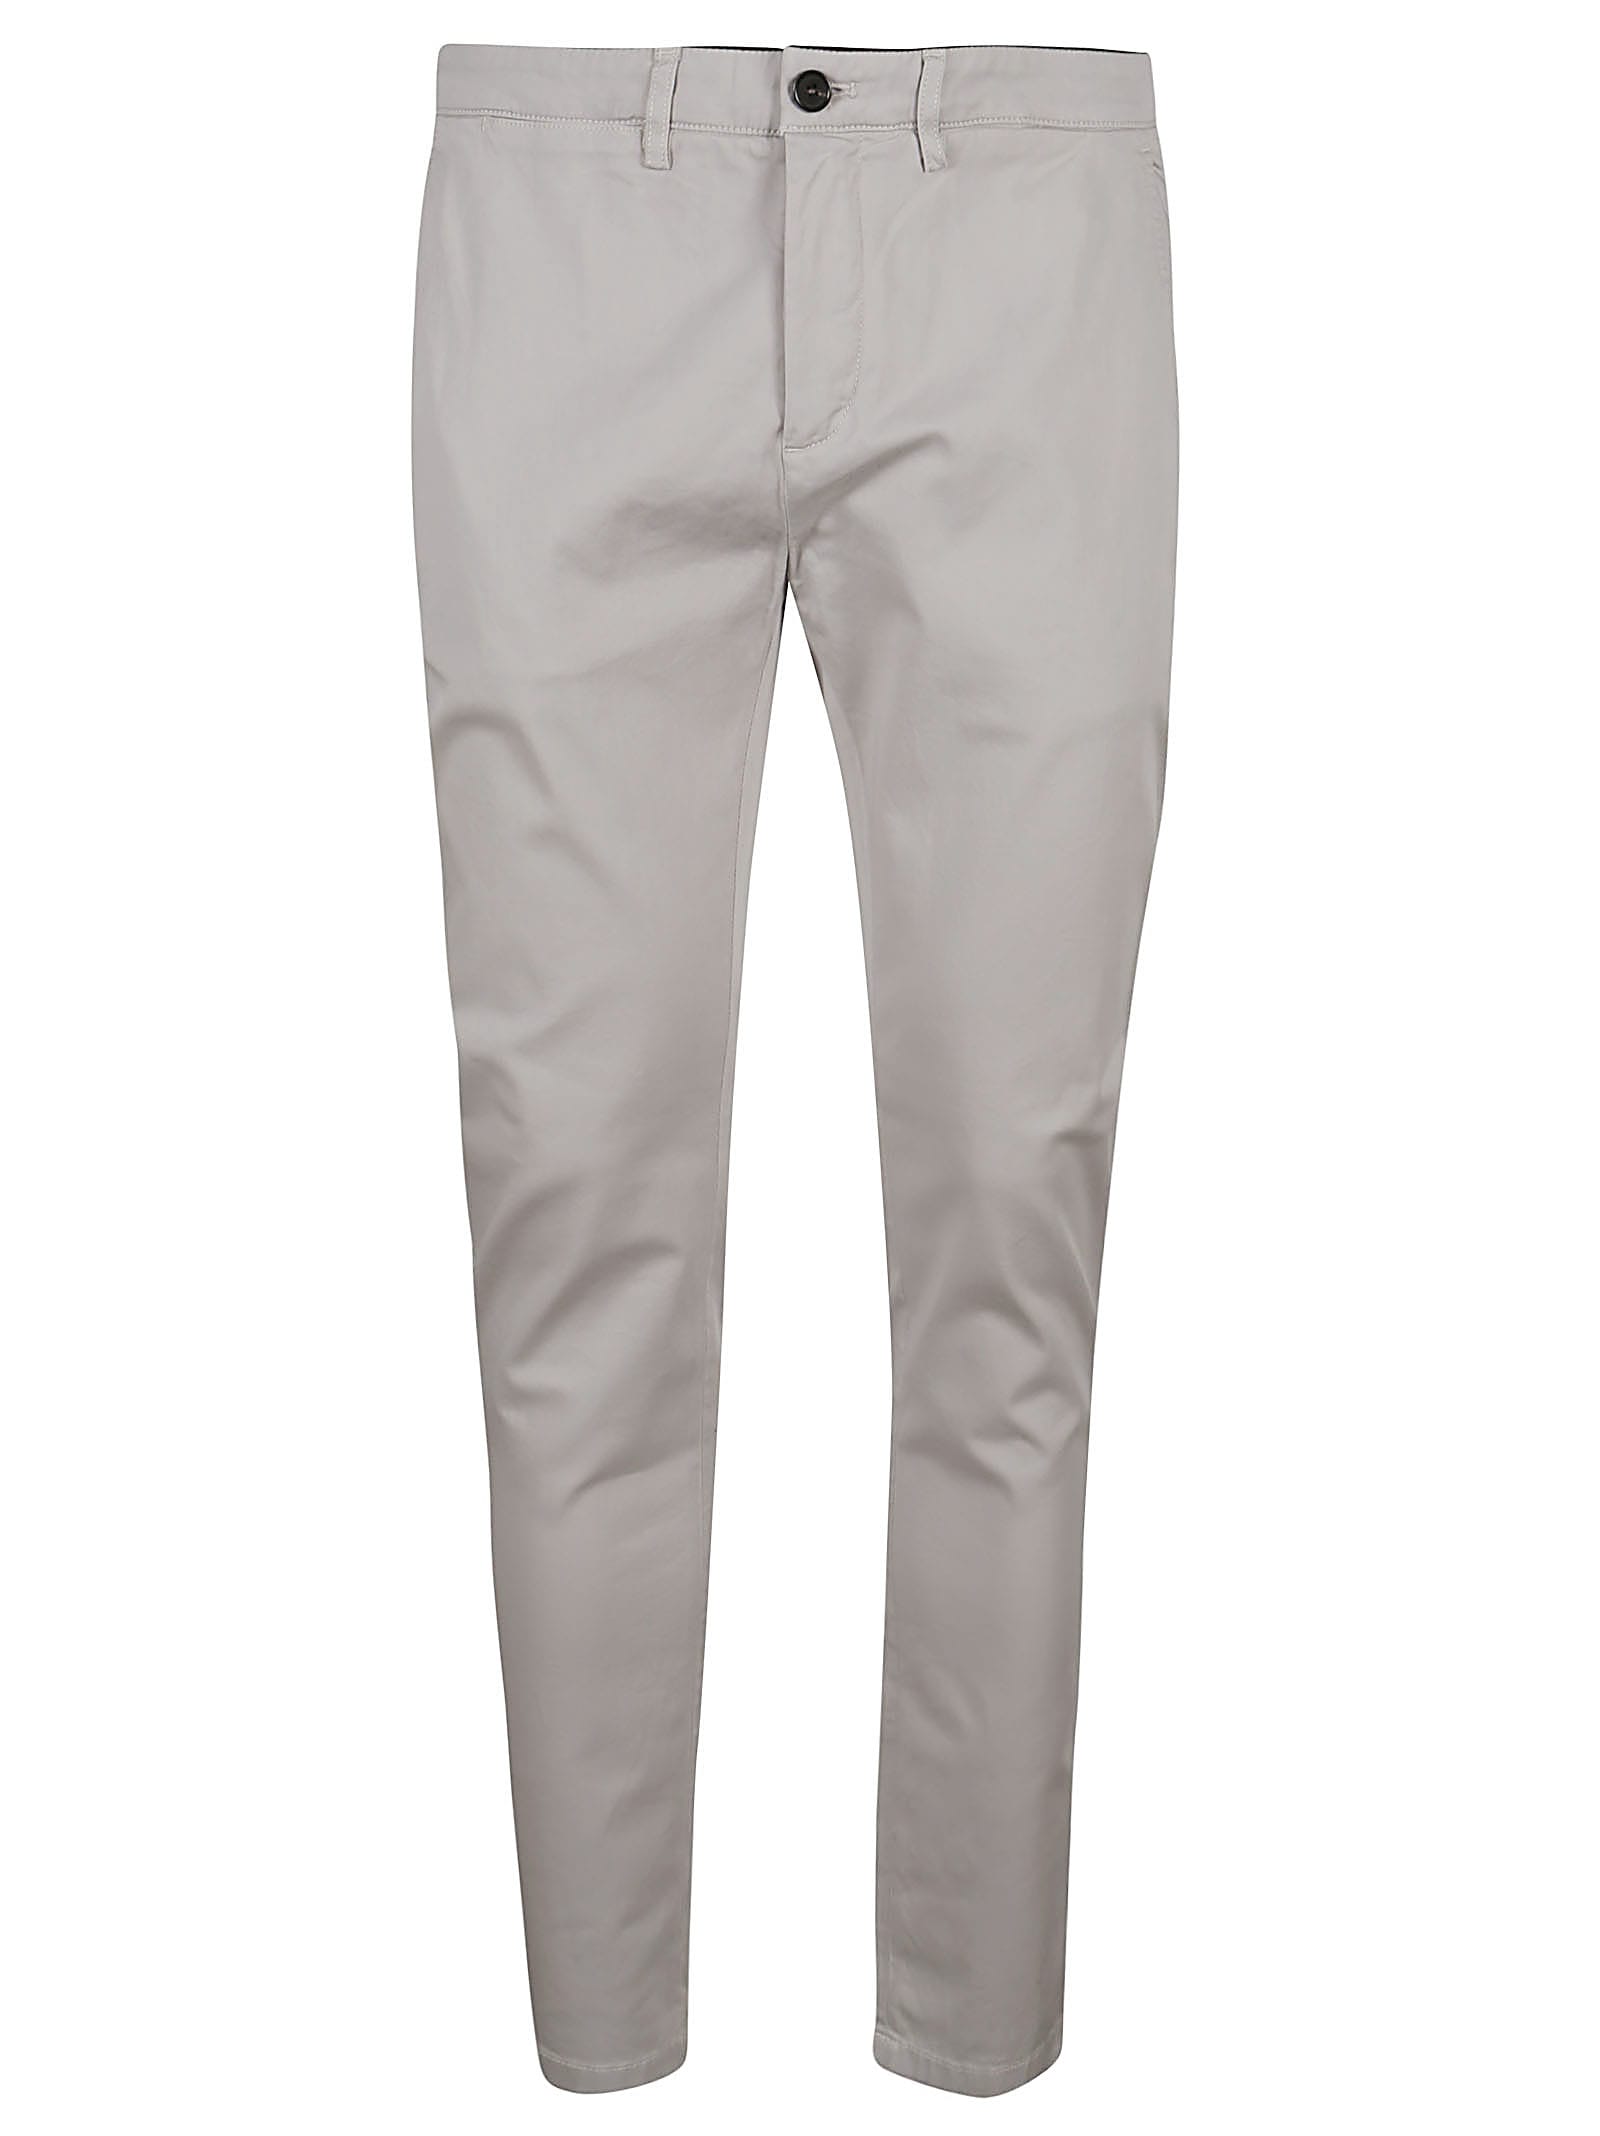 Department Five Mike Chinos Superslim Trouser In Stucco